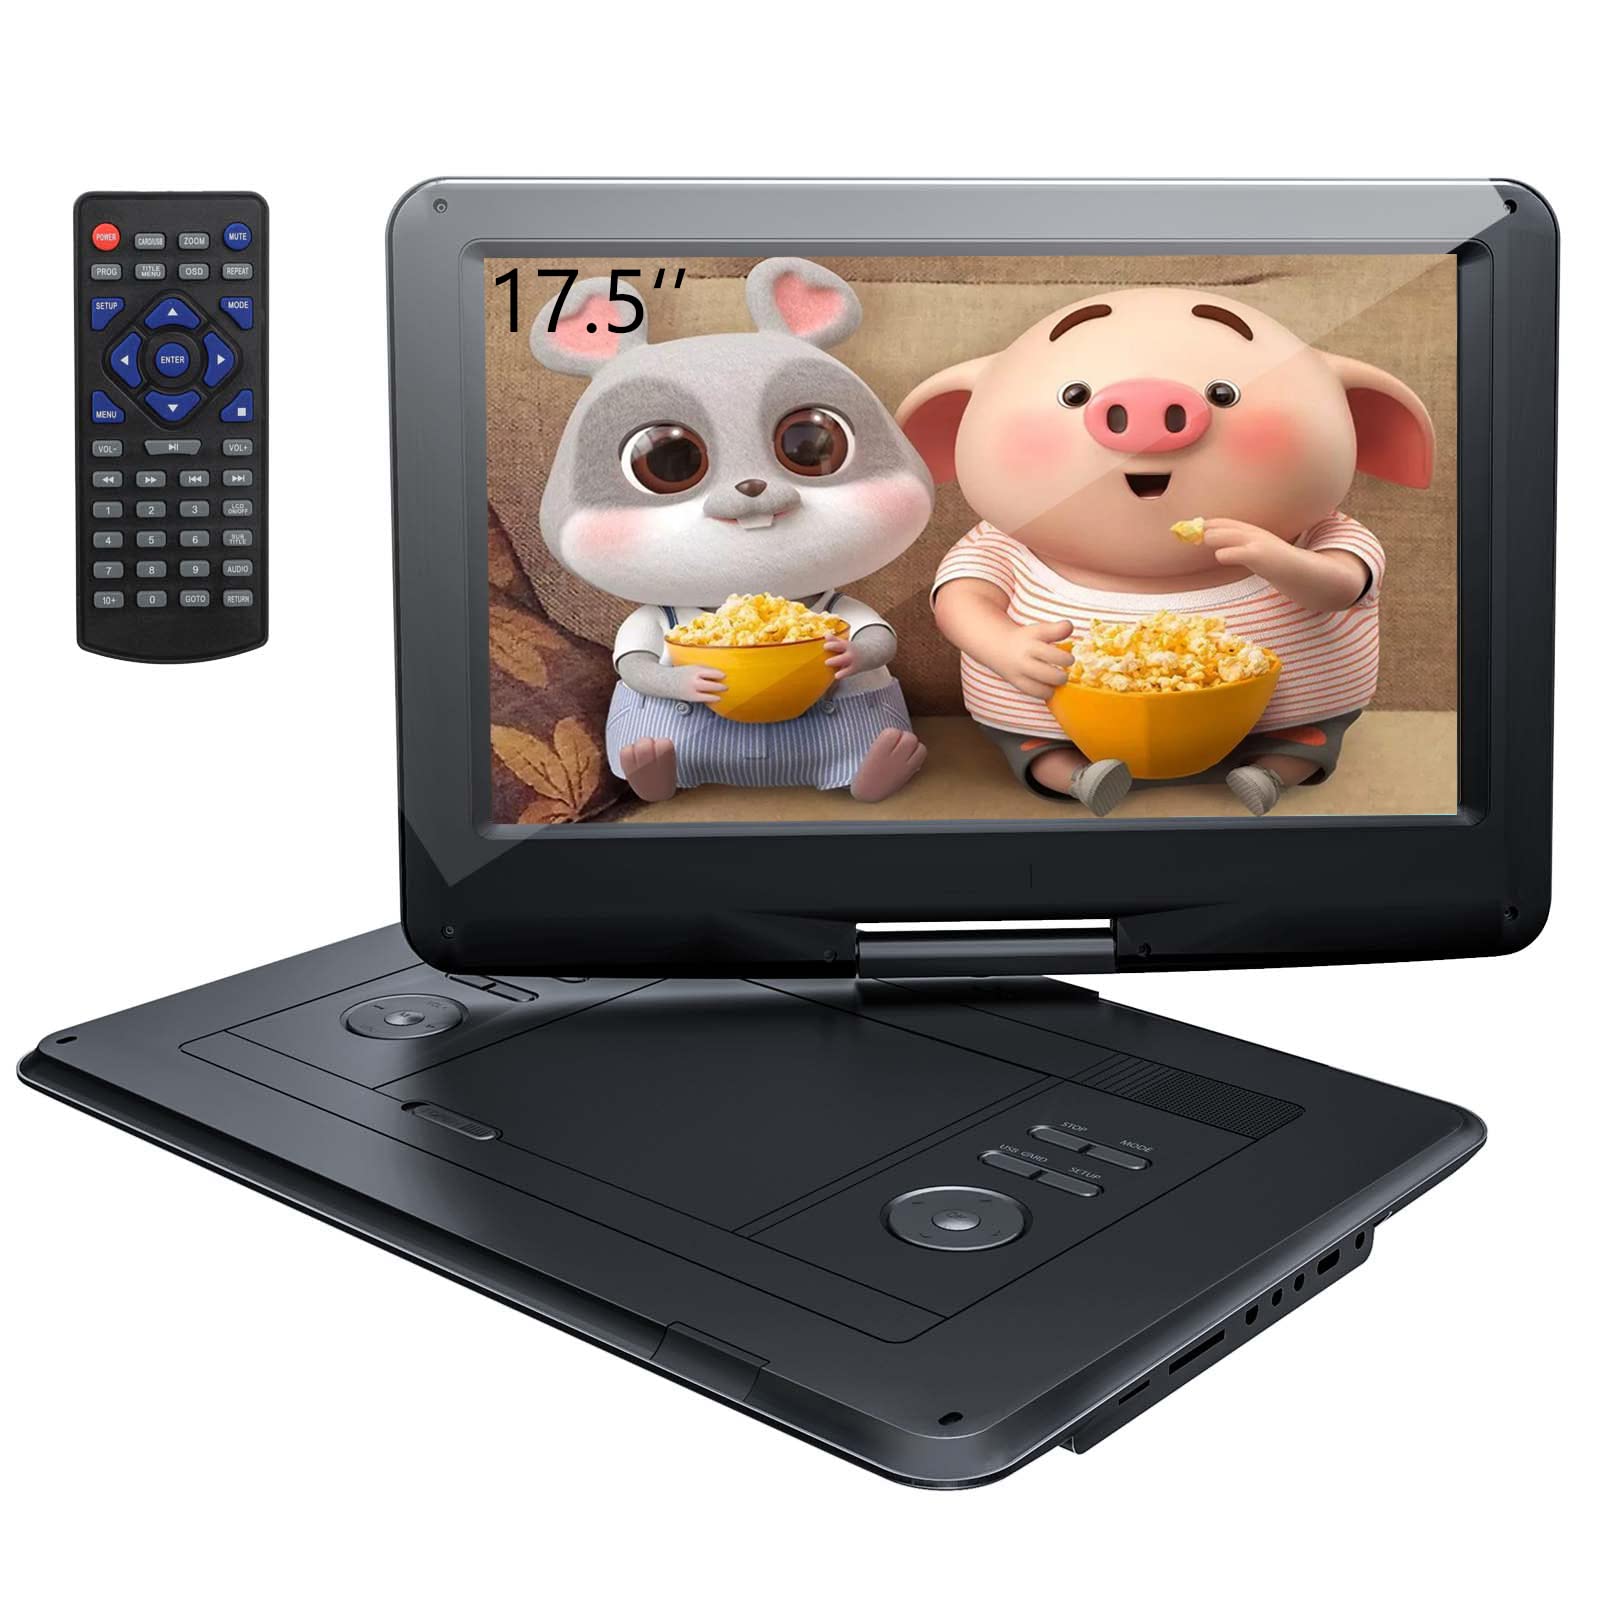 Yoton YD155 17.5" Portable DVD Player with 15.5" HD 270° Swivel Screen for Car and Kids